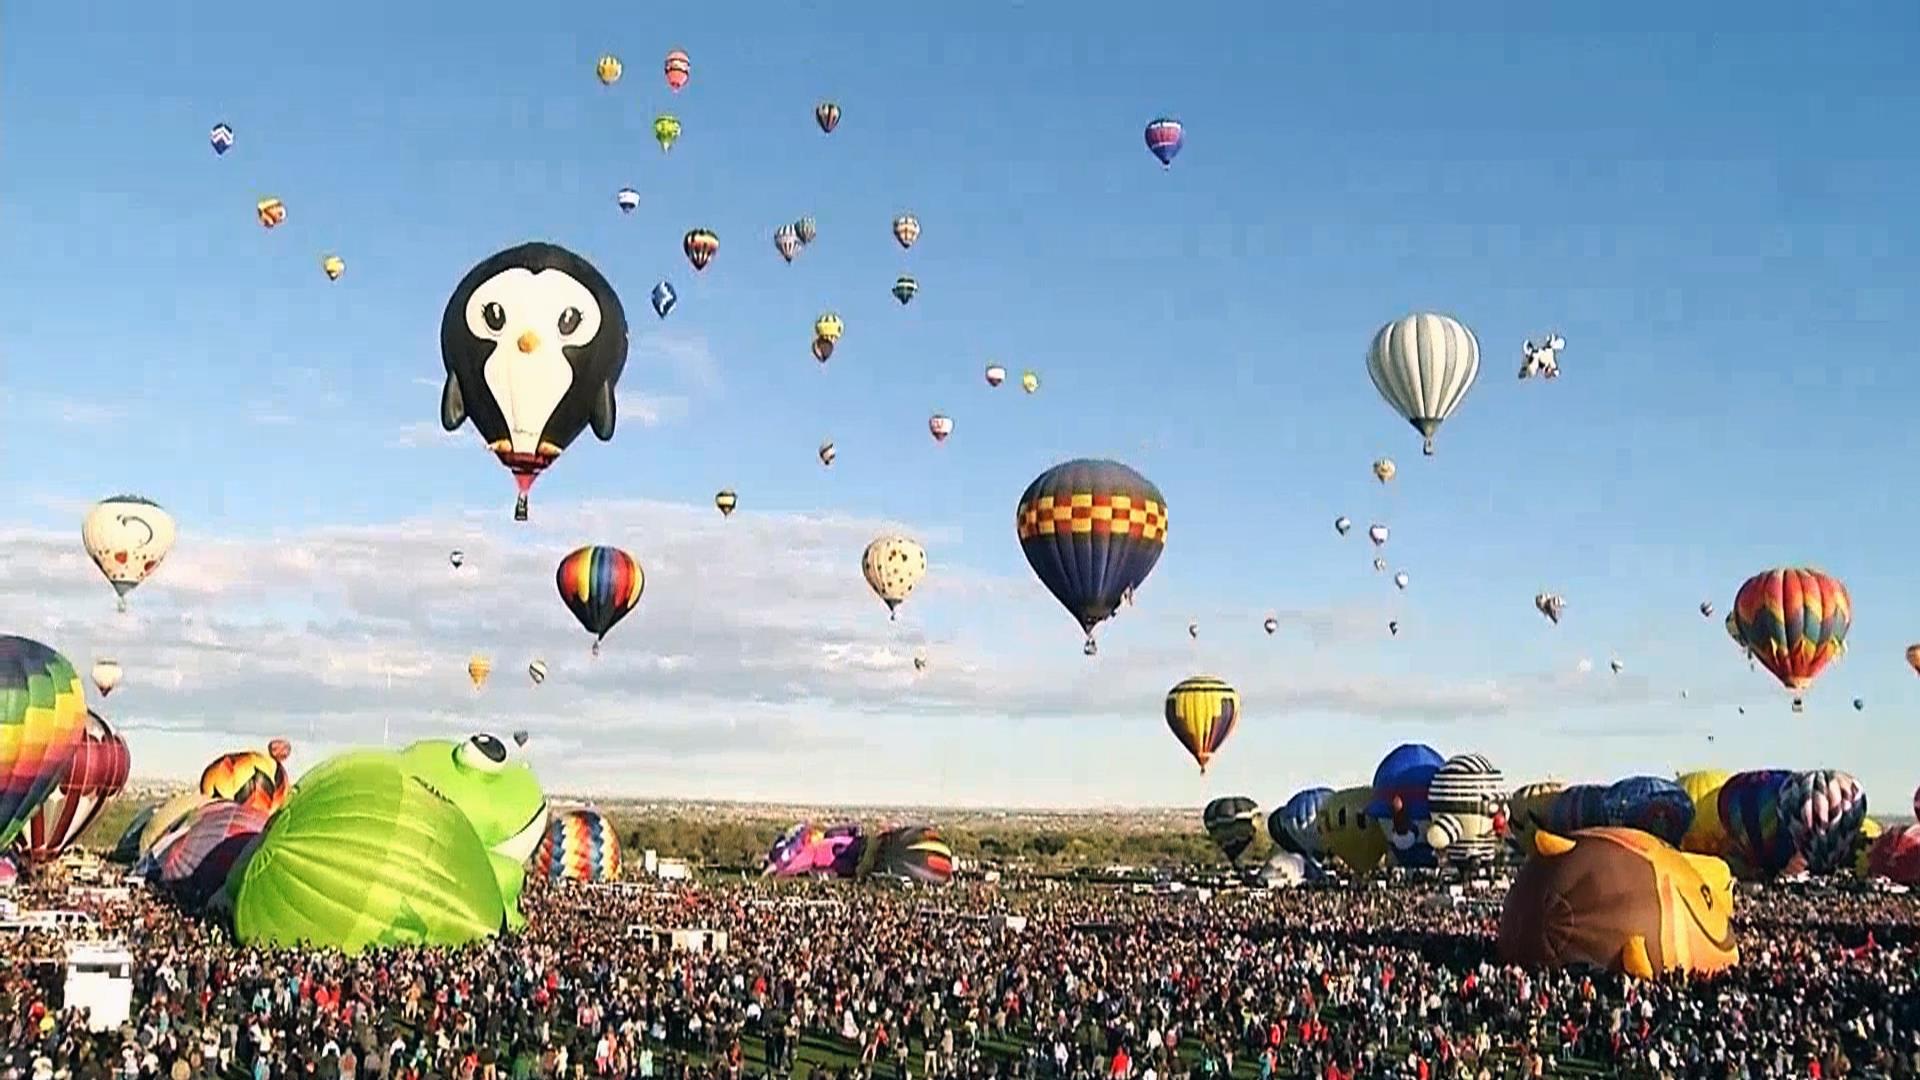 Hot air balloons of different shapes and sizes took off for the skies in Al...